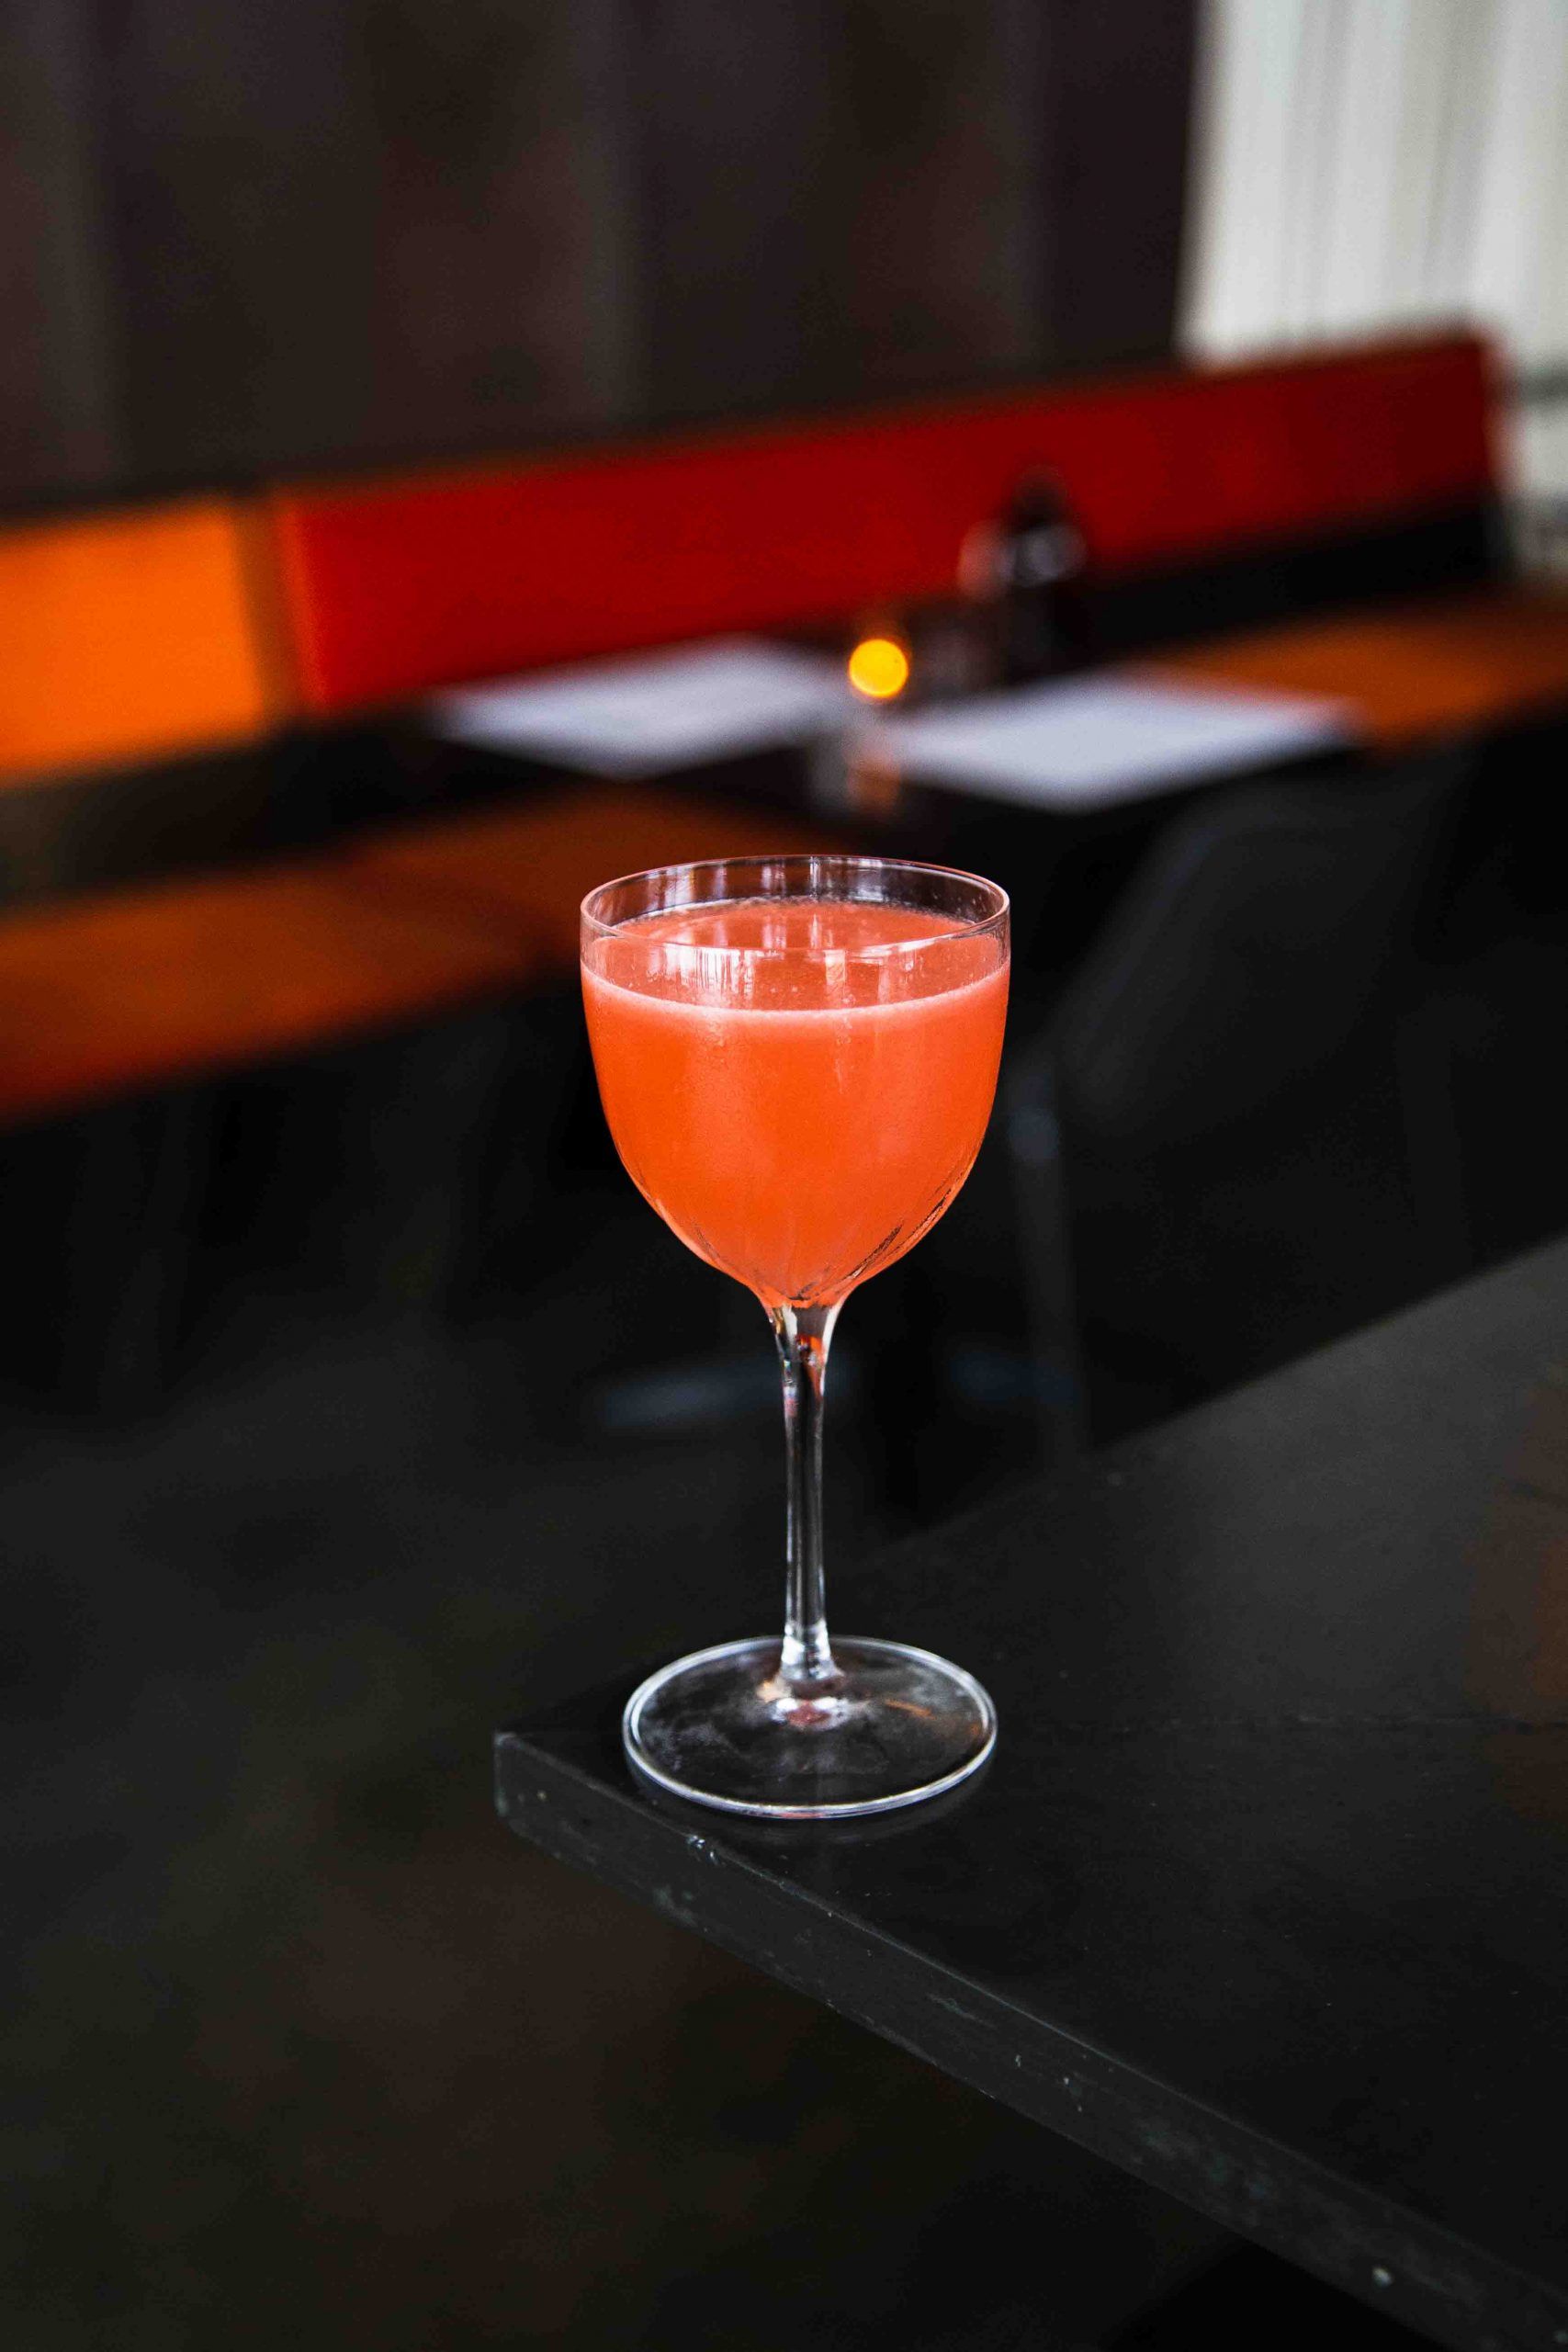 This blood orange take on the Corpse Reviver cocktail is a drink we love